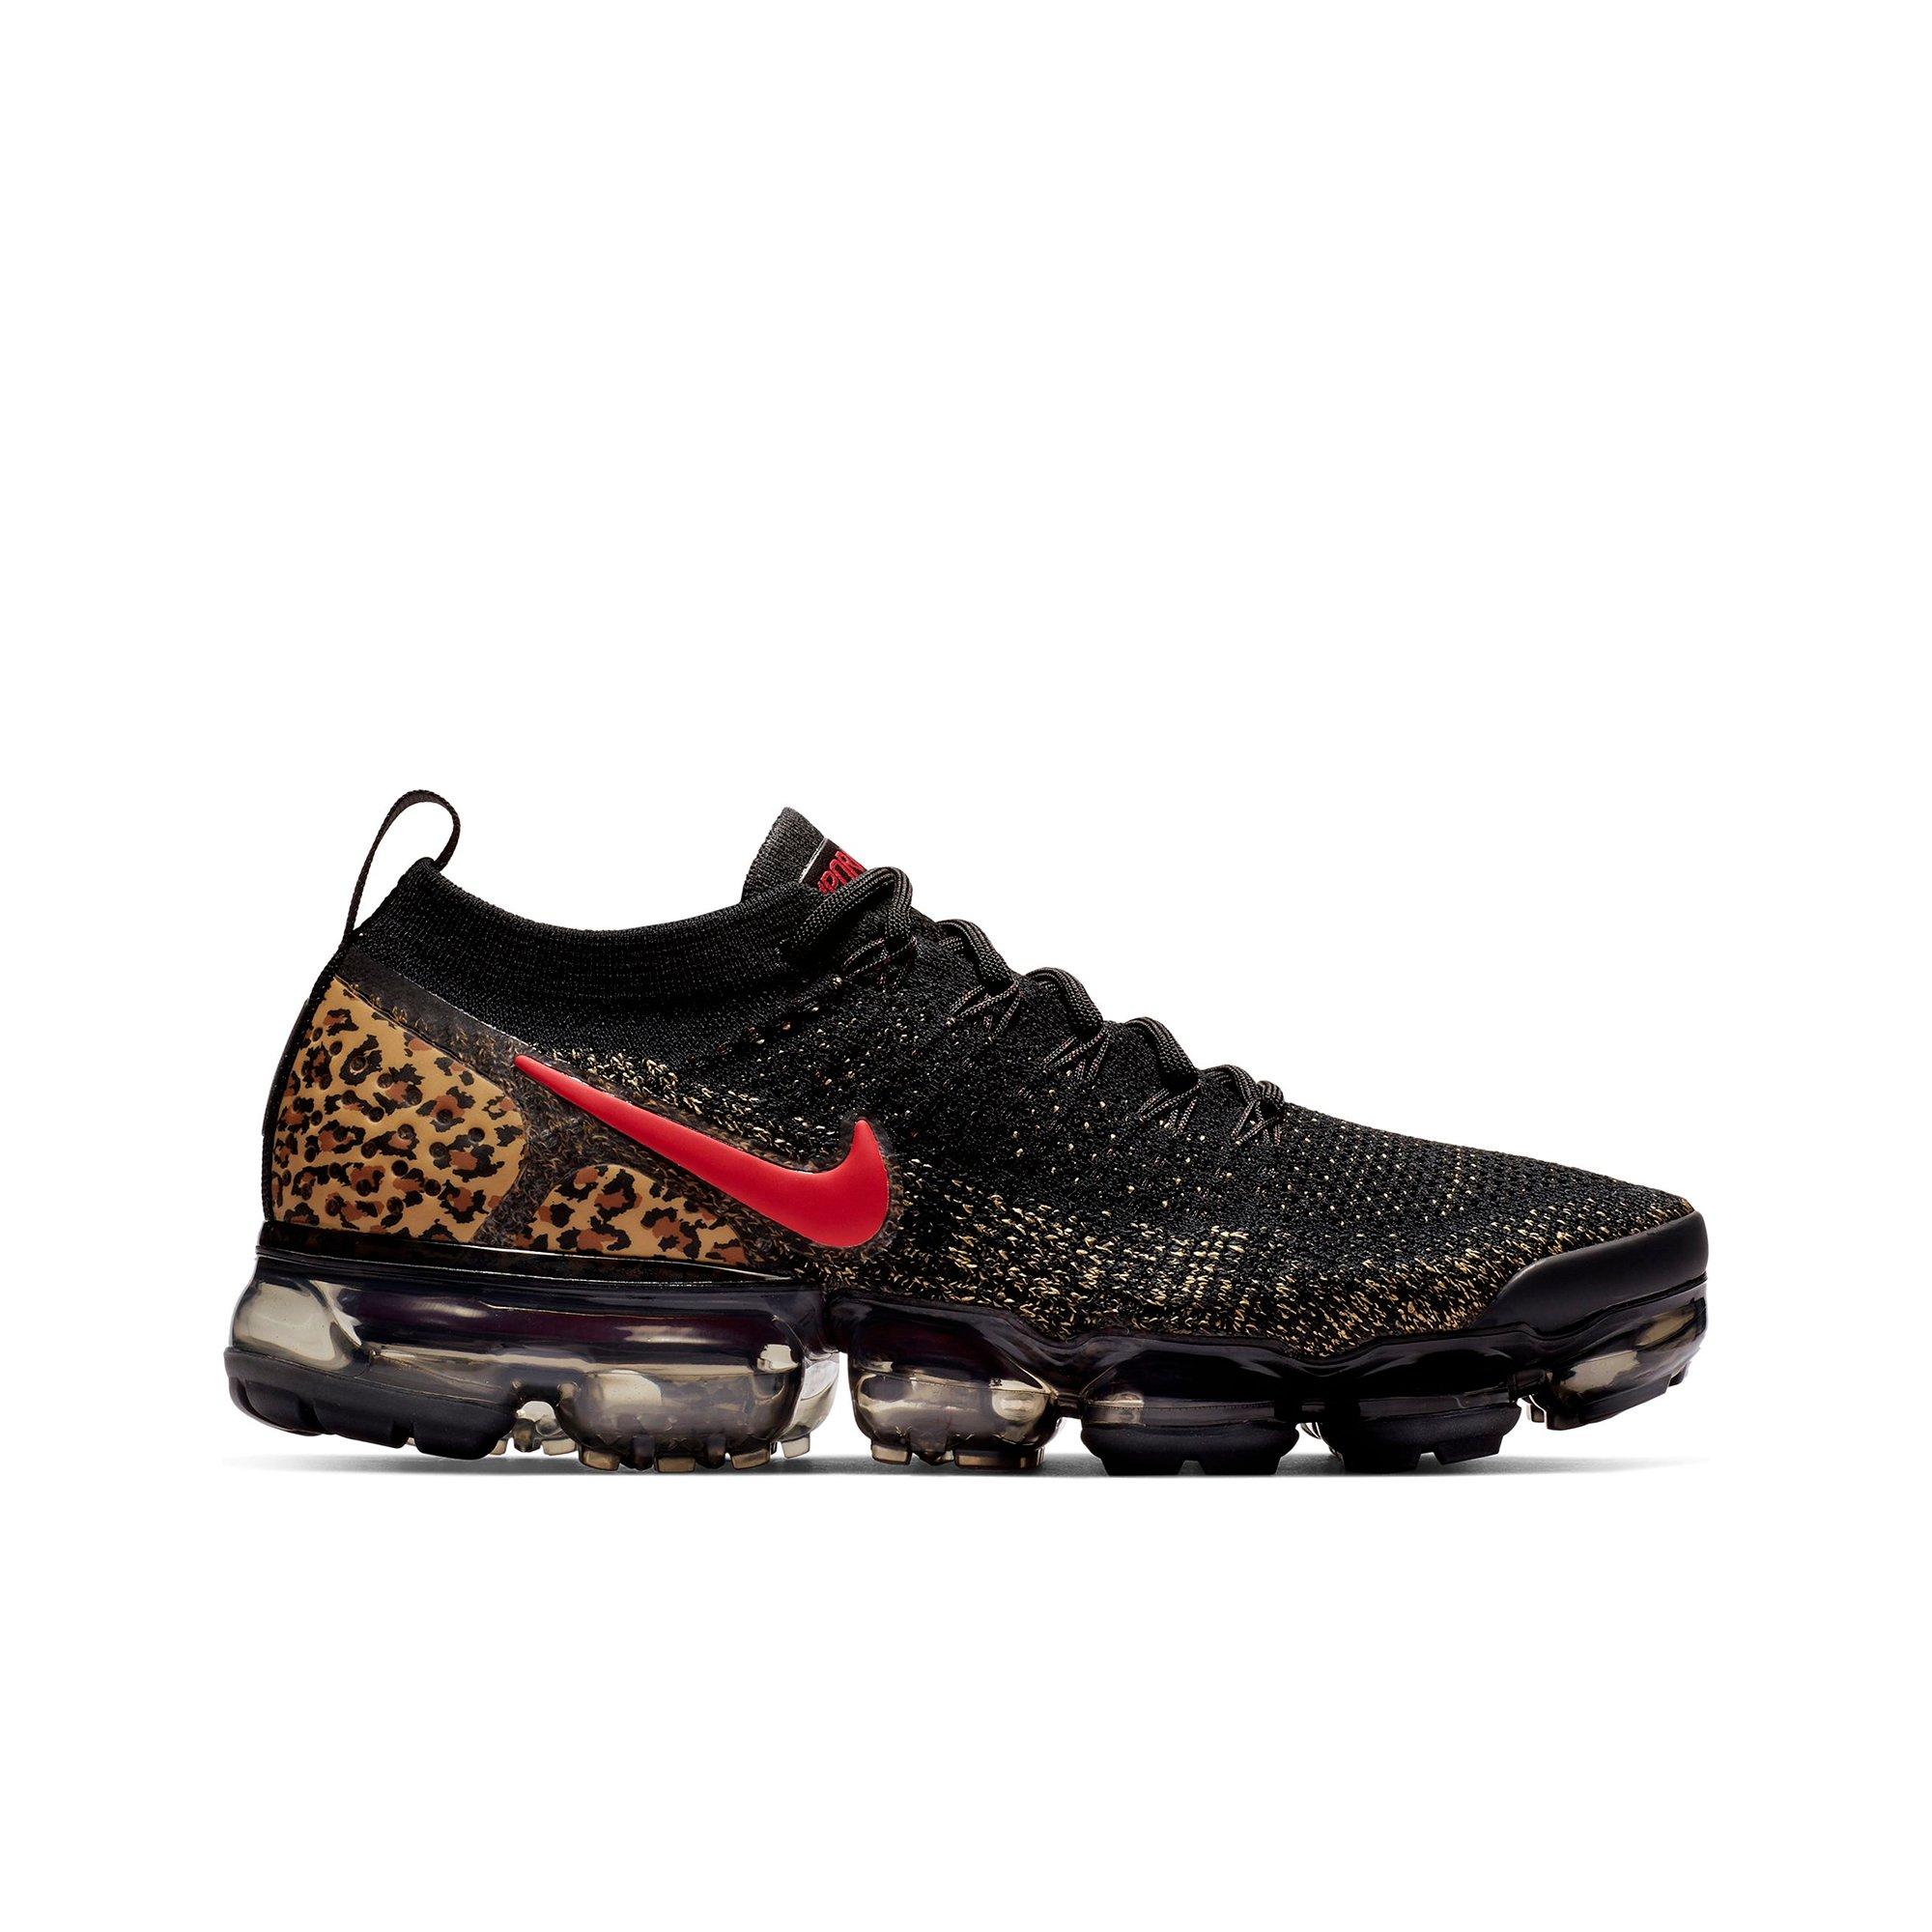 womens nike shoes with leopard print 